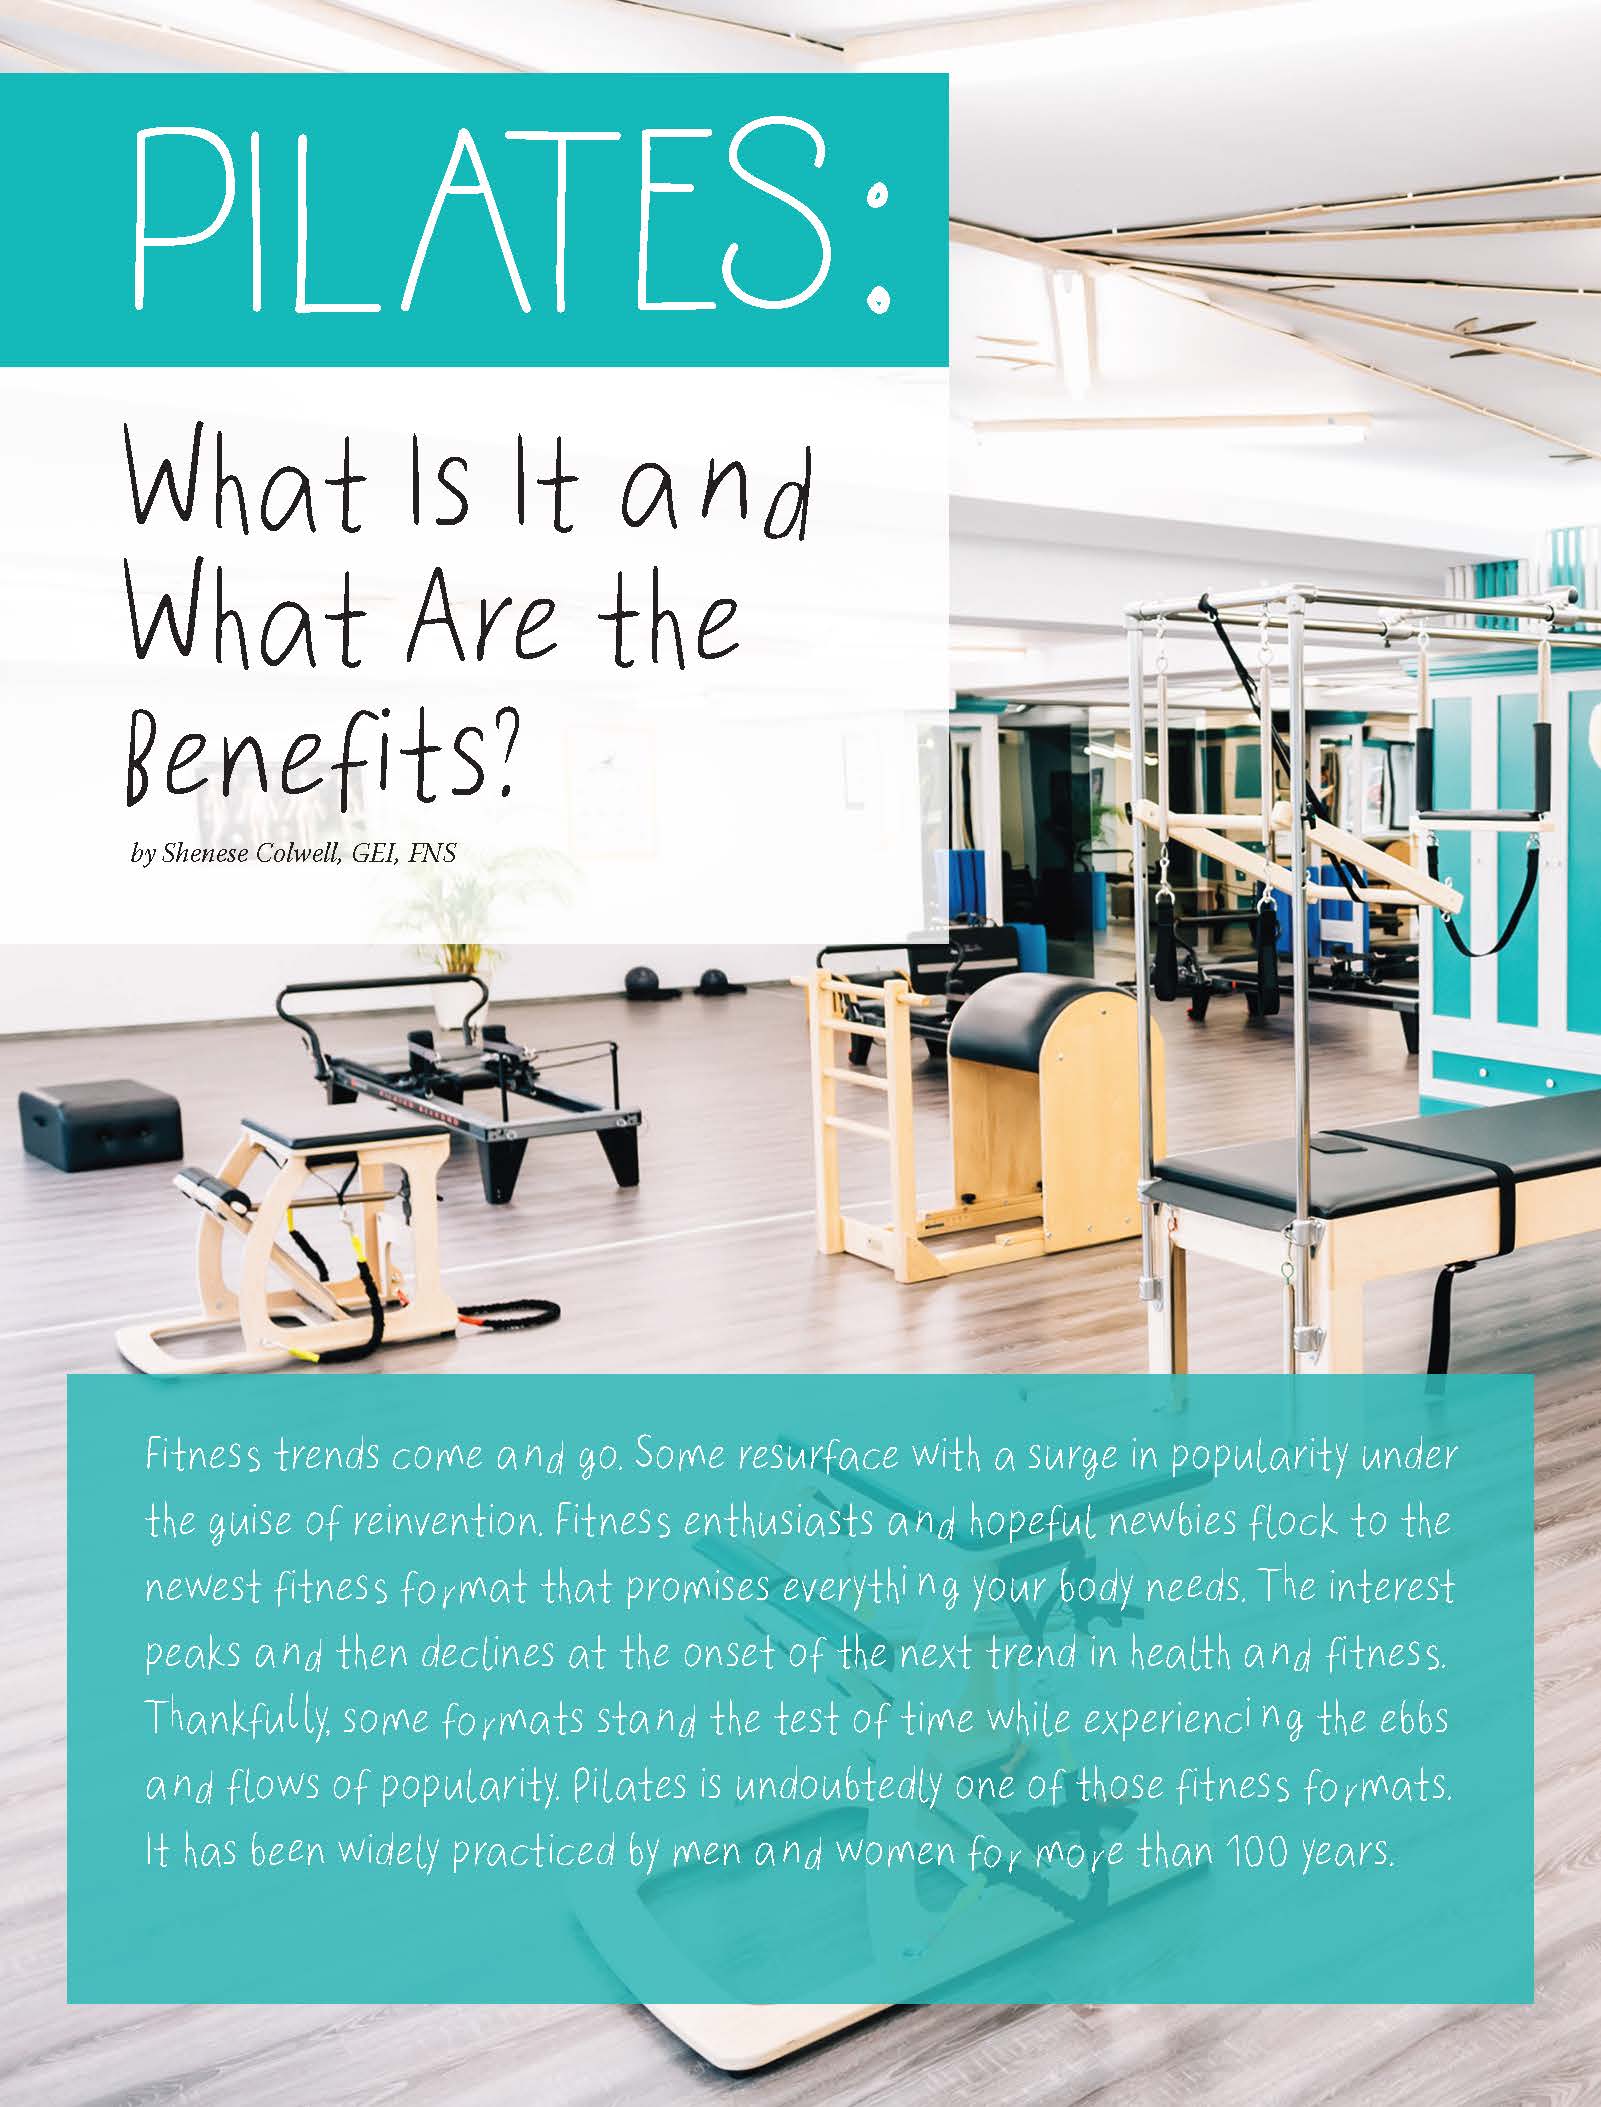 Pilates: What Is It and What Are the Benefits? - Obesity Action Coalition